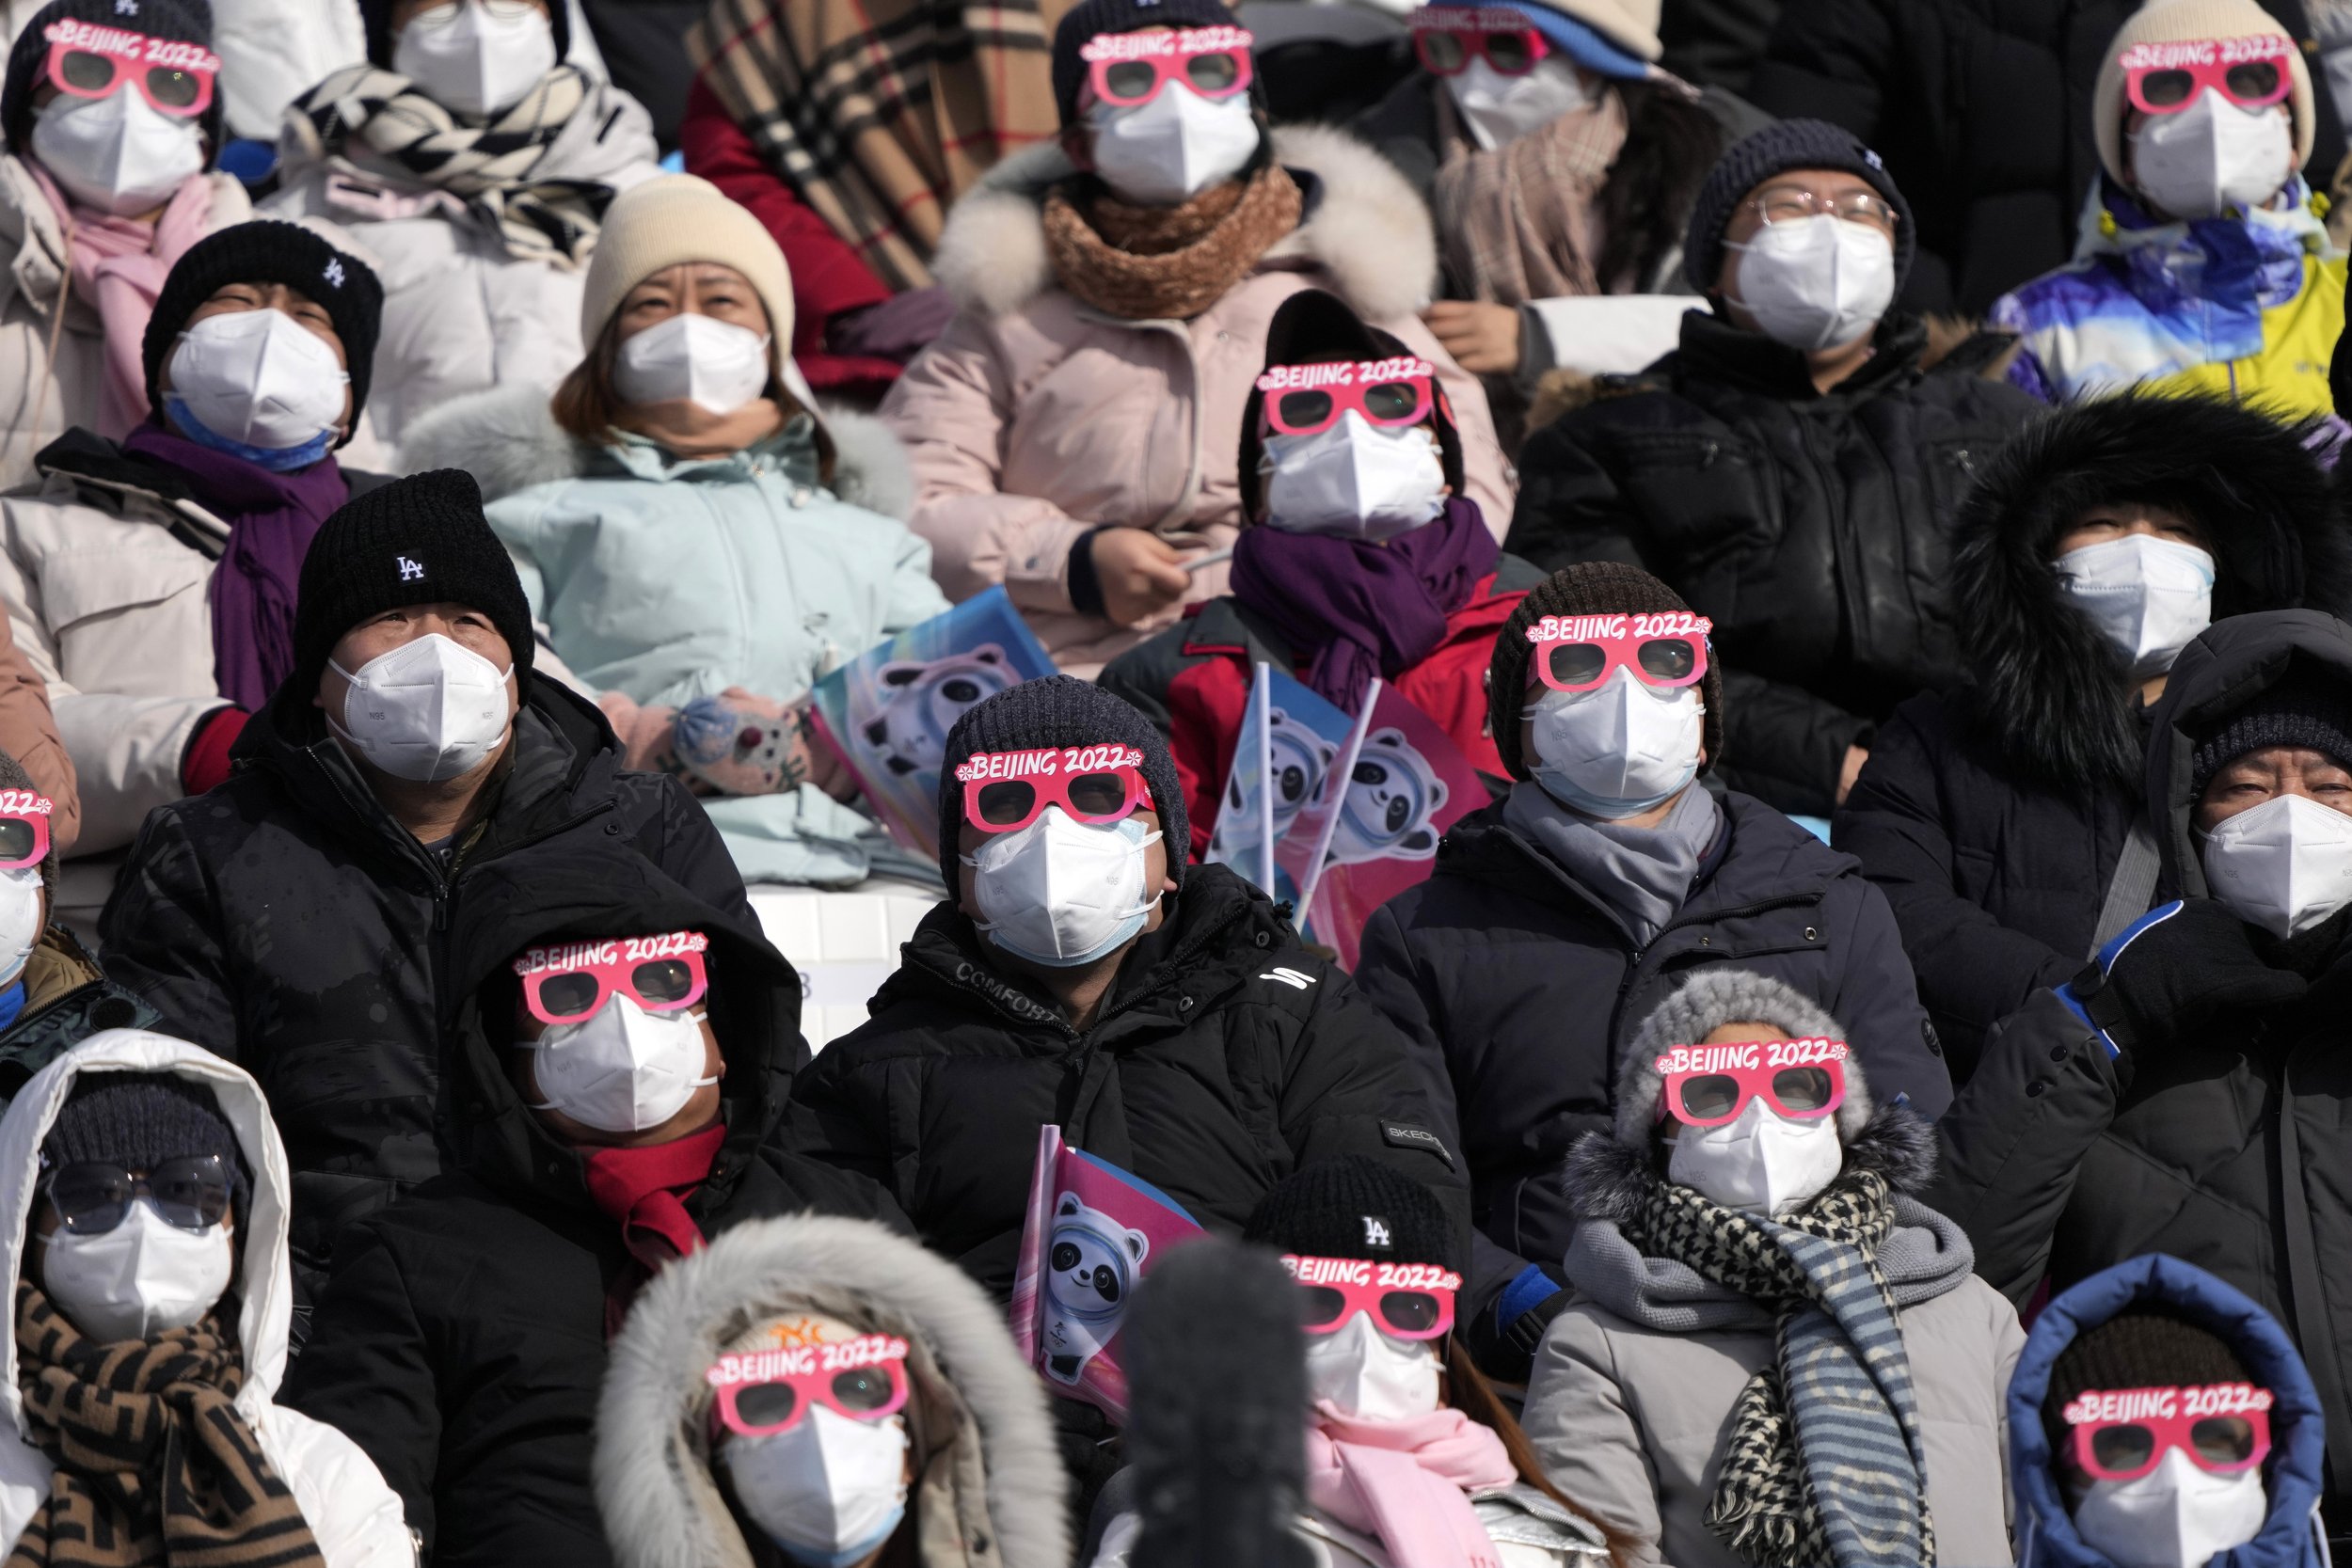  Spectators watch during men's slopestyle finals at the 2022 Winter Olympics, Monday, Feb. 7, 2022, in Zhangjiakou, China. (AP Photo/Lee Jin-man) 